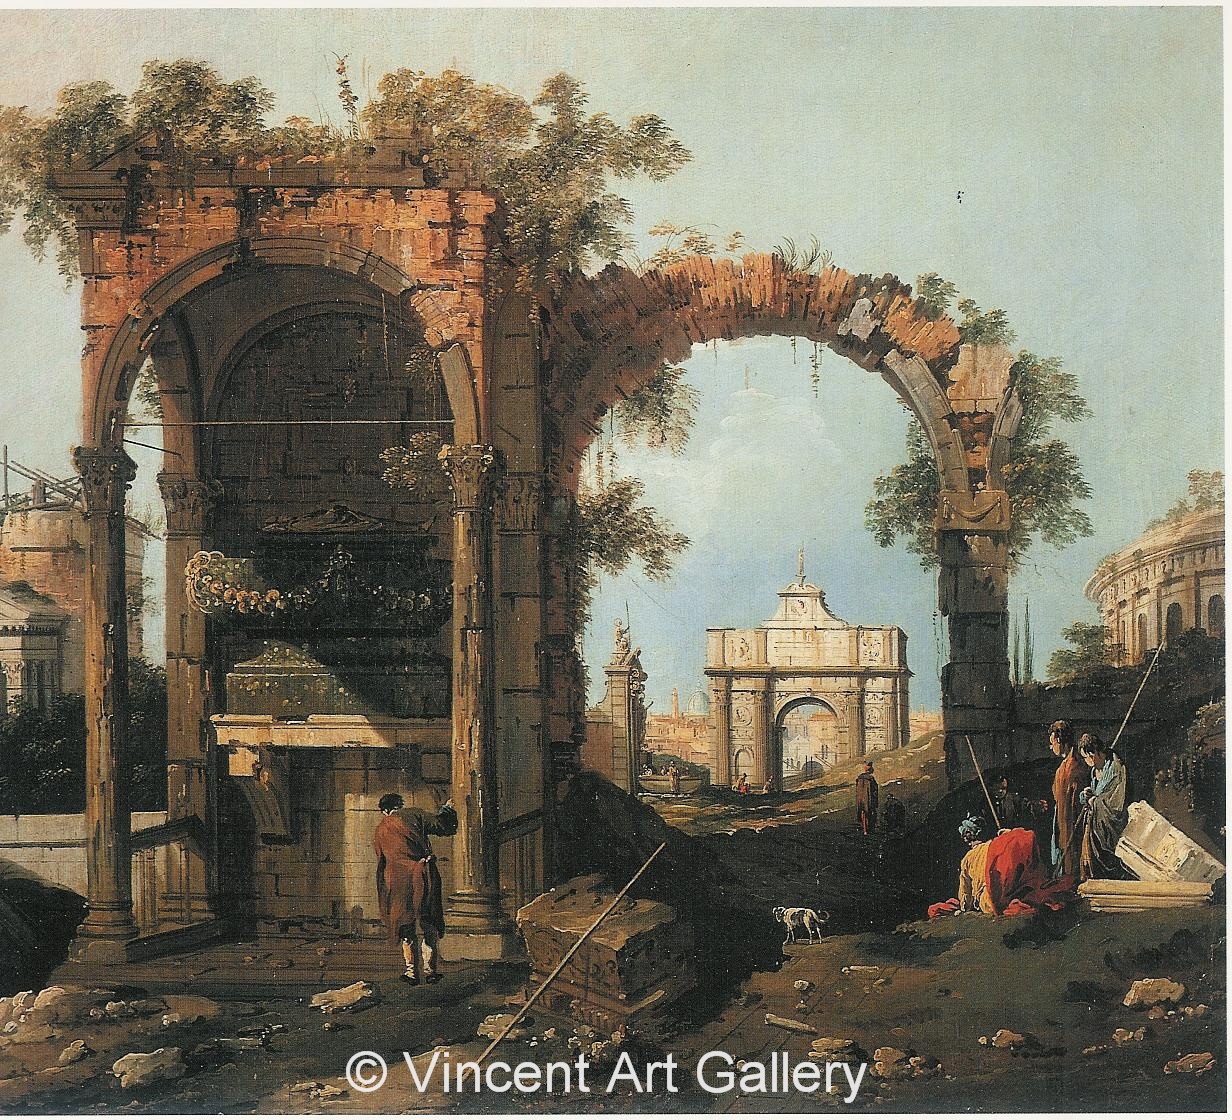 A1033, CANALETTO, Landscape with Ruins